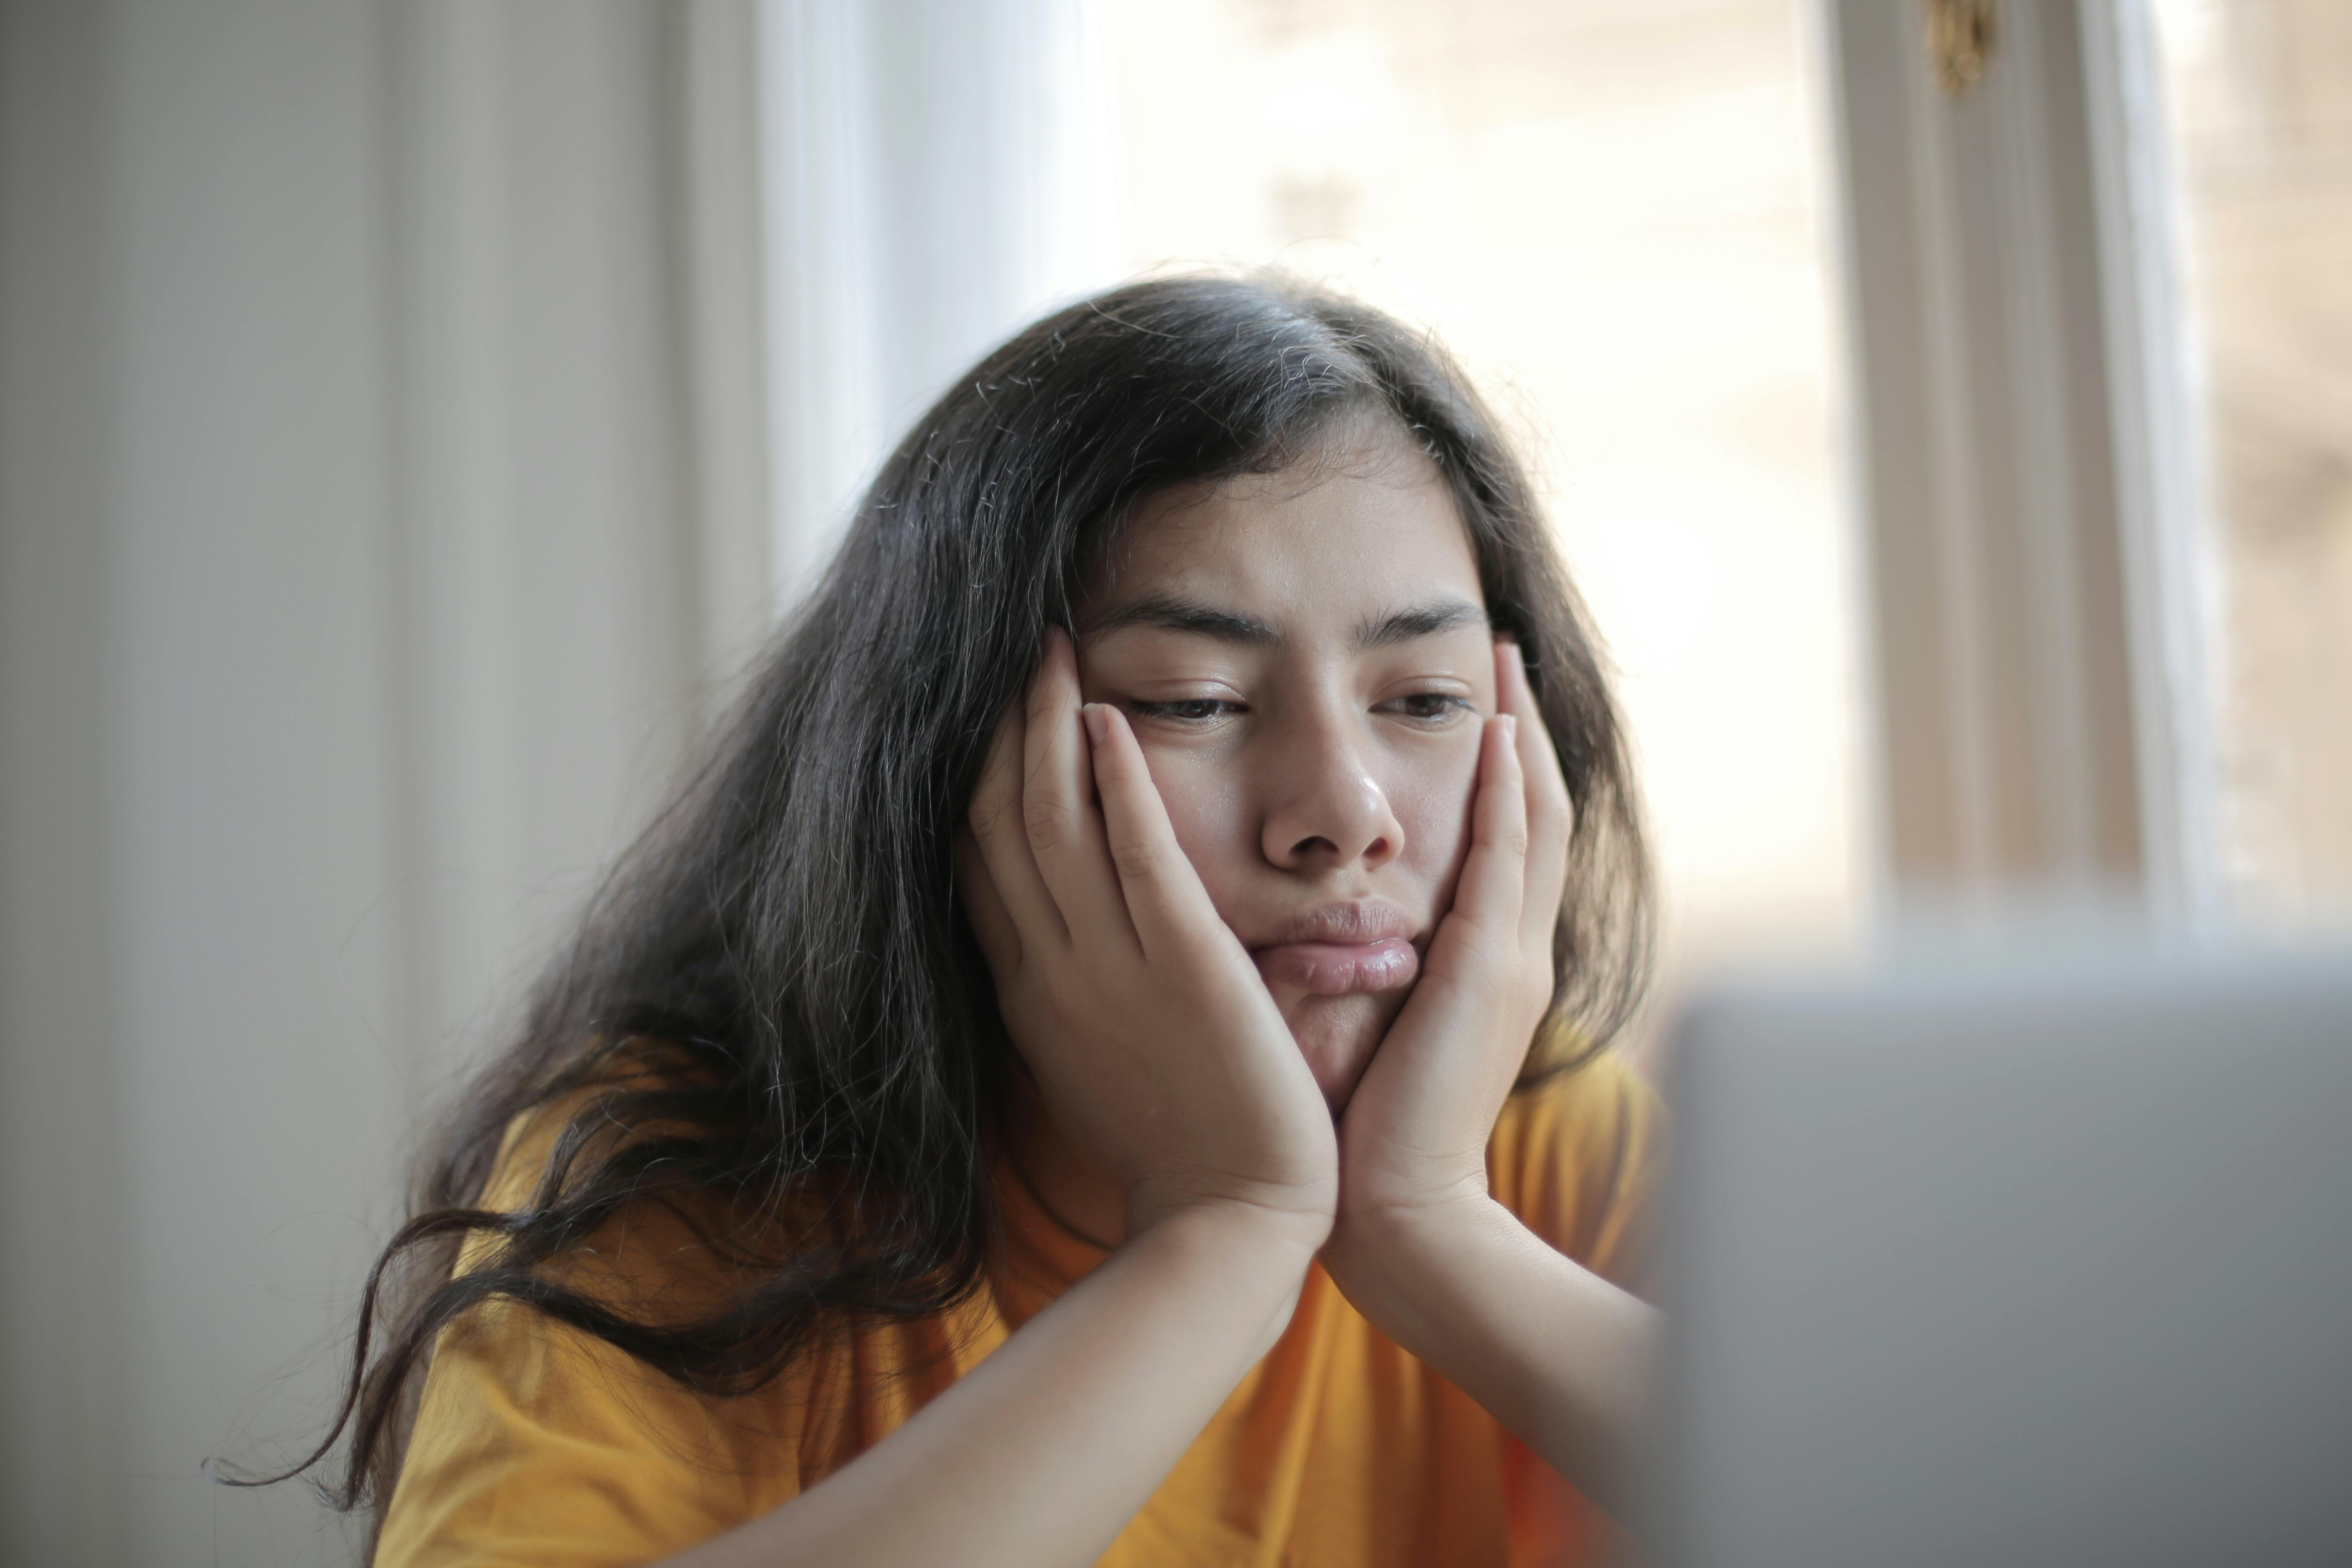 An unhappy girl sitting and looking at a screen | Source: Pexels